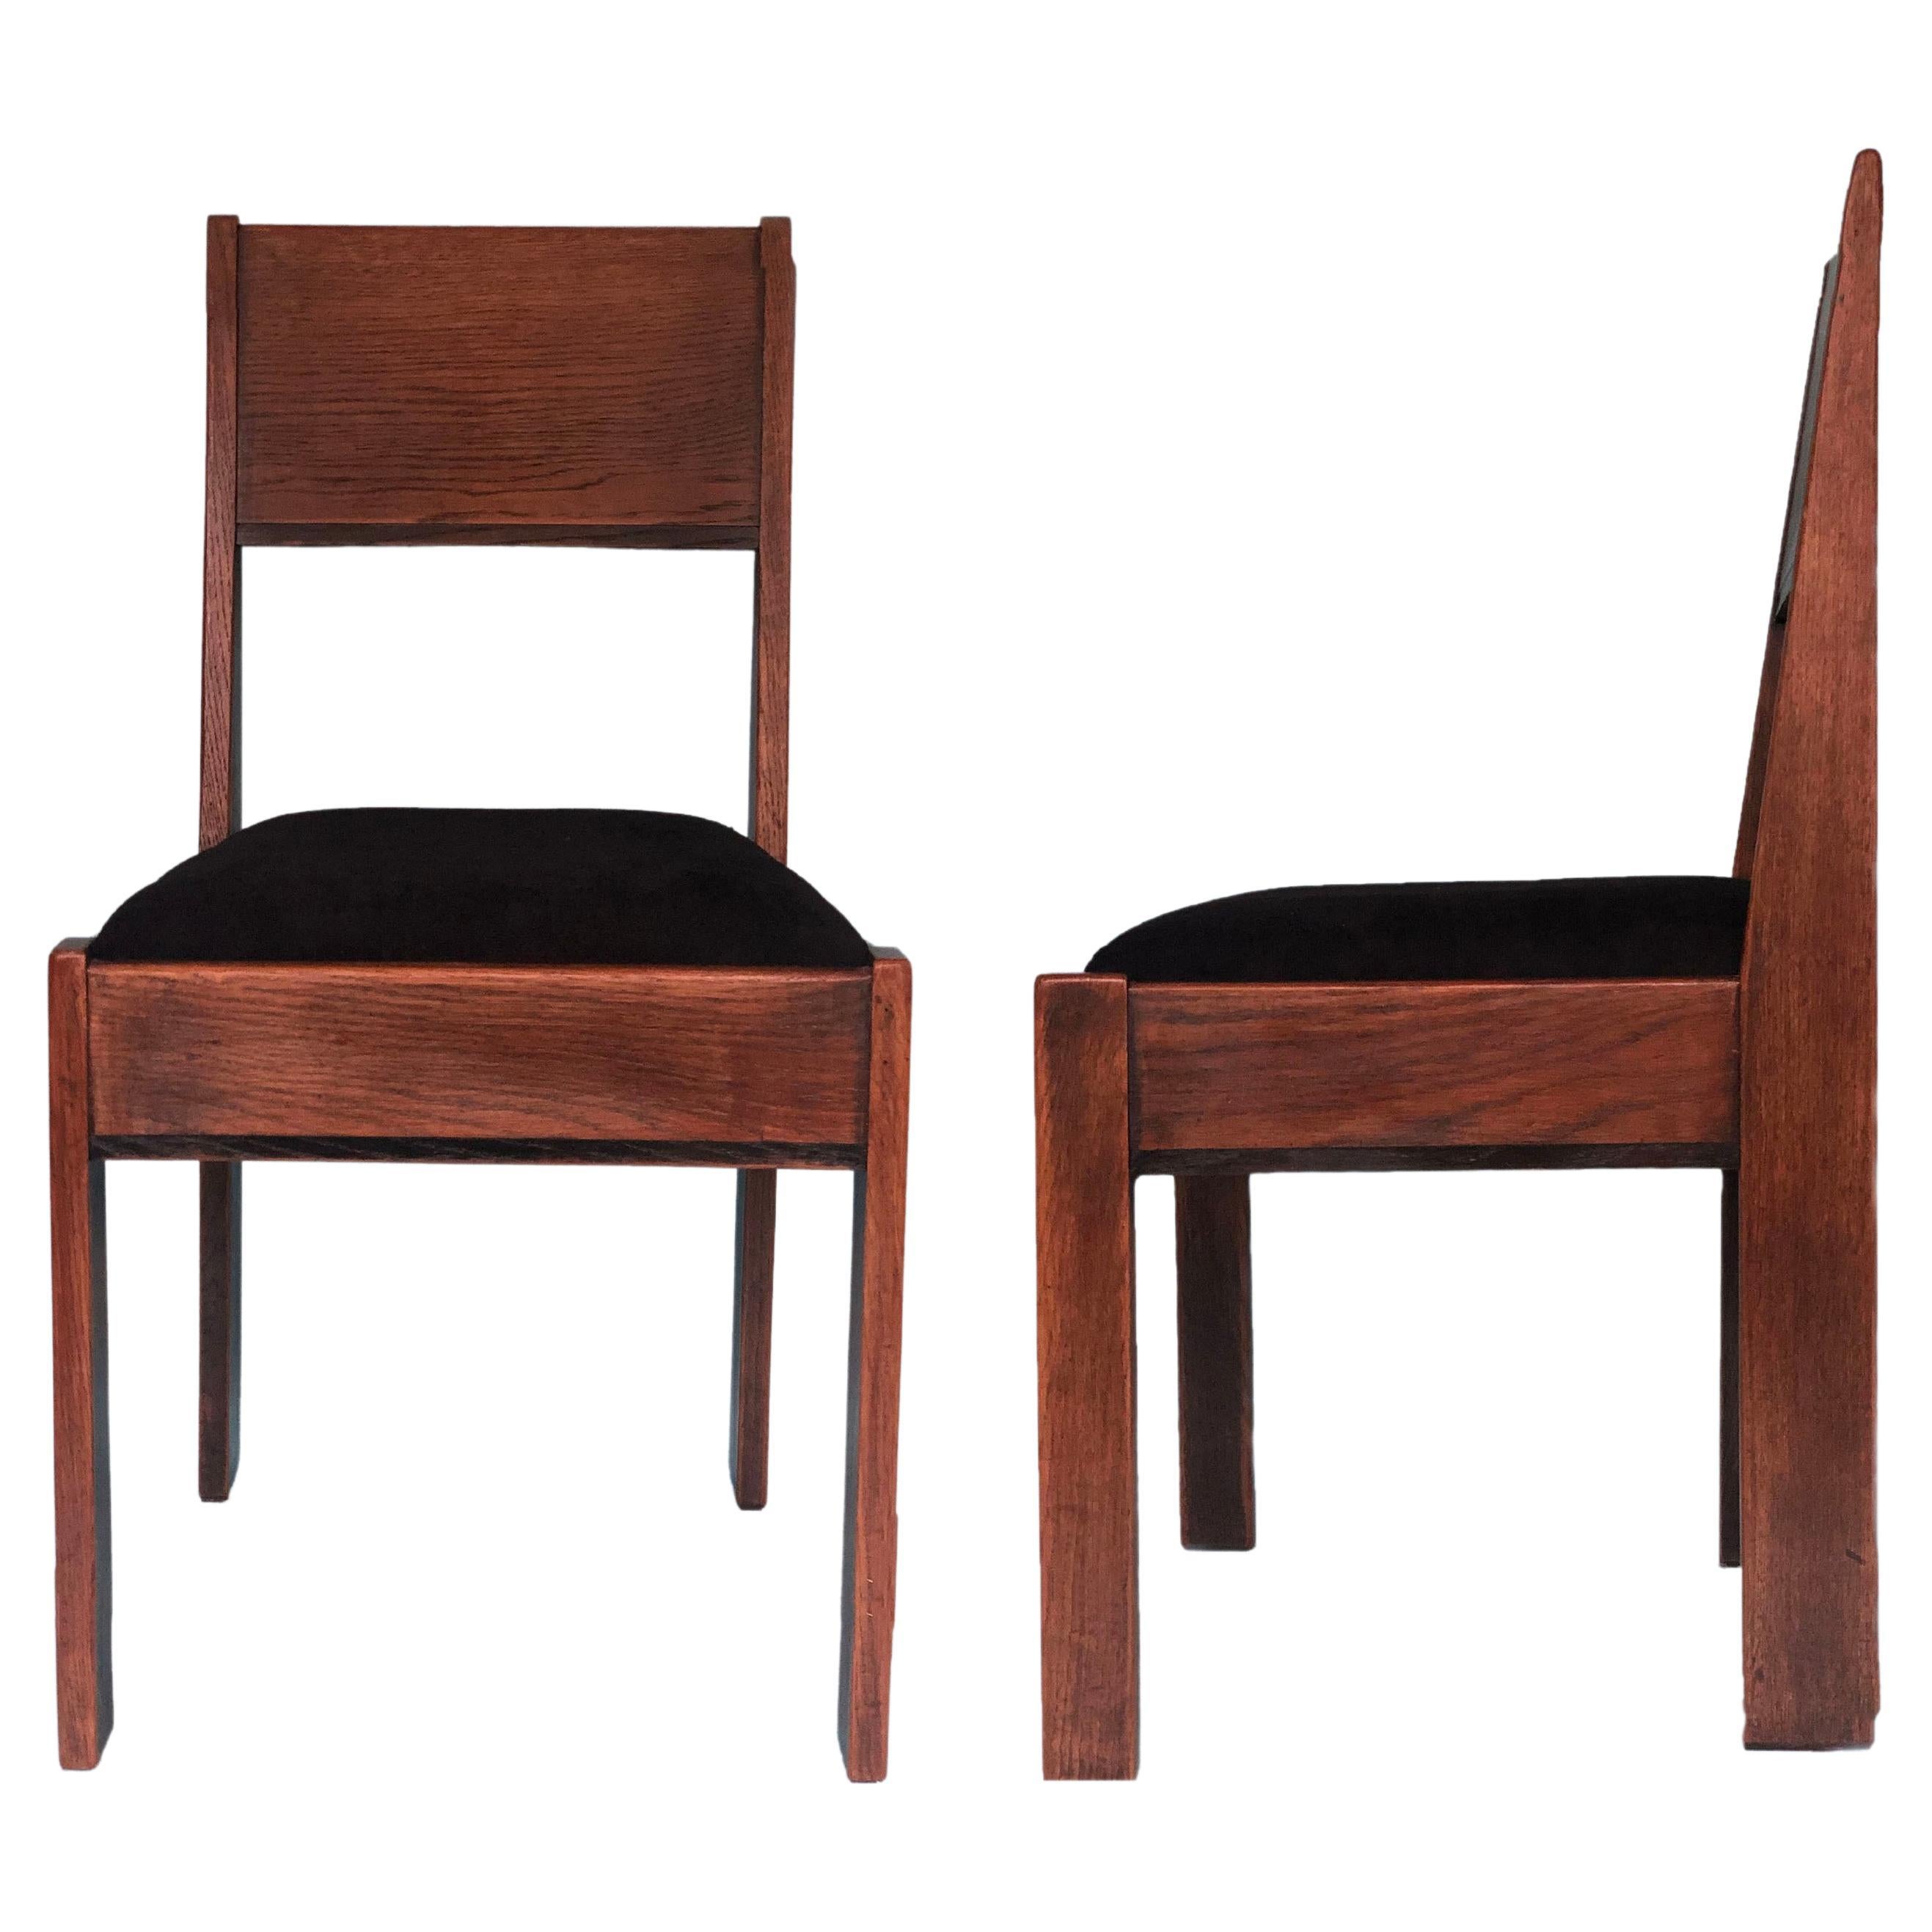 Oak Art Deco Design Chairs by J.A. Muntendam for L.O.V. Oosterbeek 1920s set of2